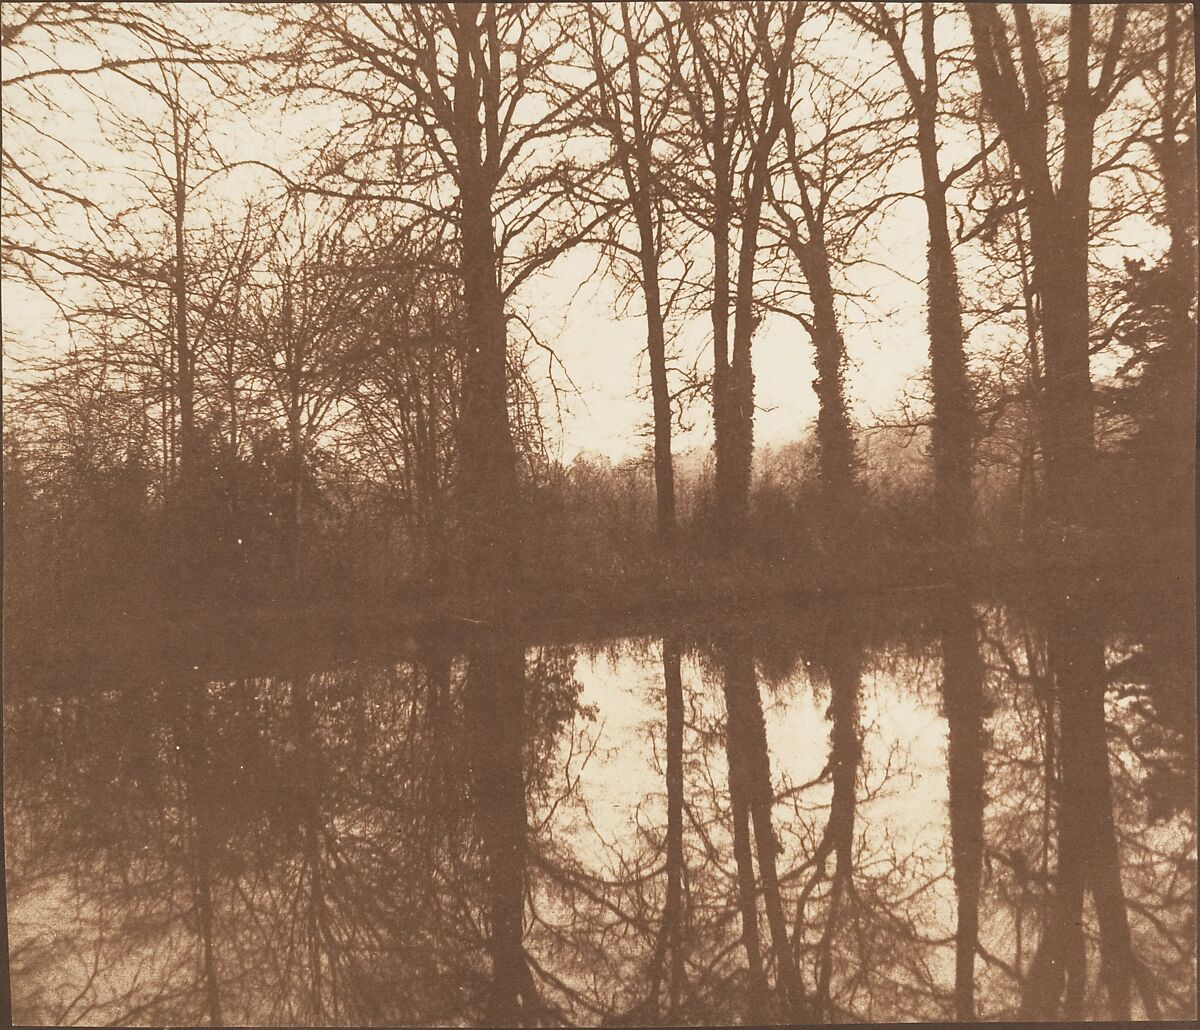 [Winter Trees, Reflected in a Pond], William Henry Fox Talbot (British, Dorset 1800–1877 Lacock), Salted paper print from paper negative 